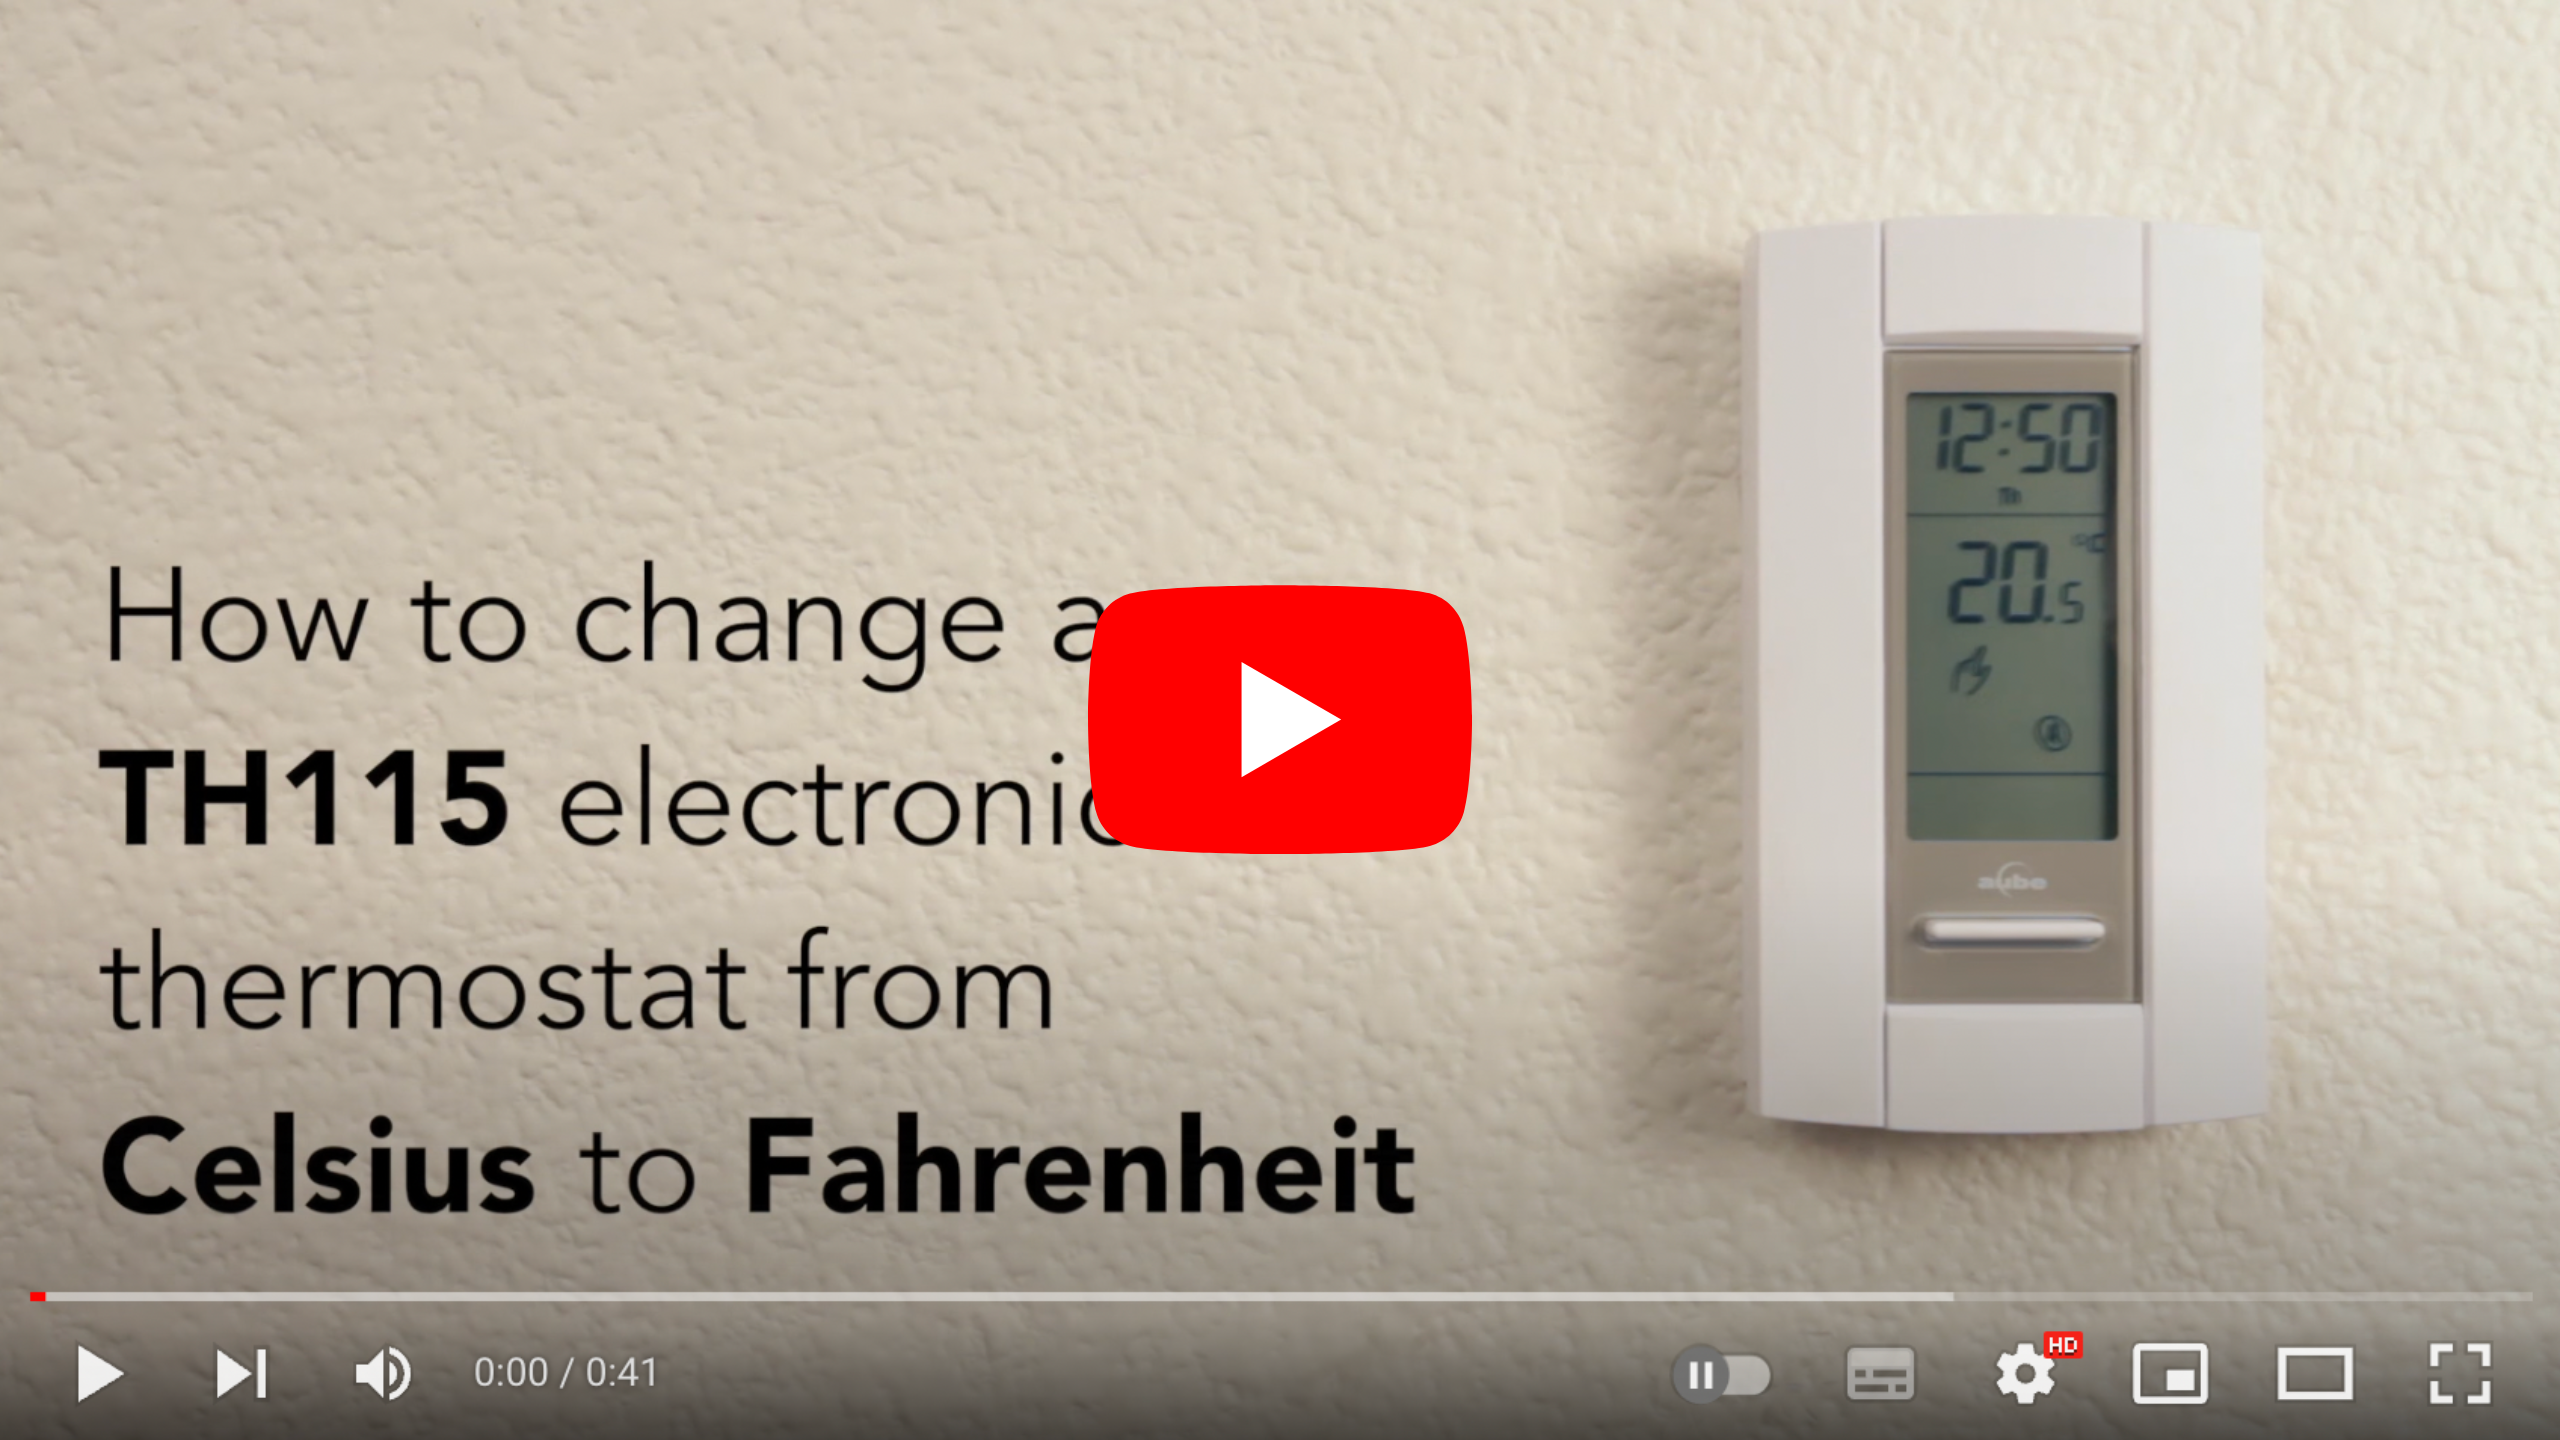 video instructions on how to change the TH115 Thermostat from Celsius to Fahrenheit